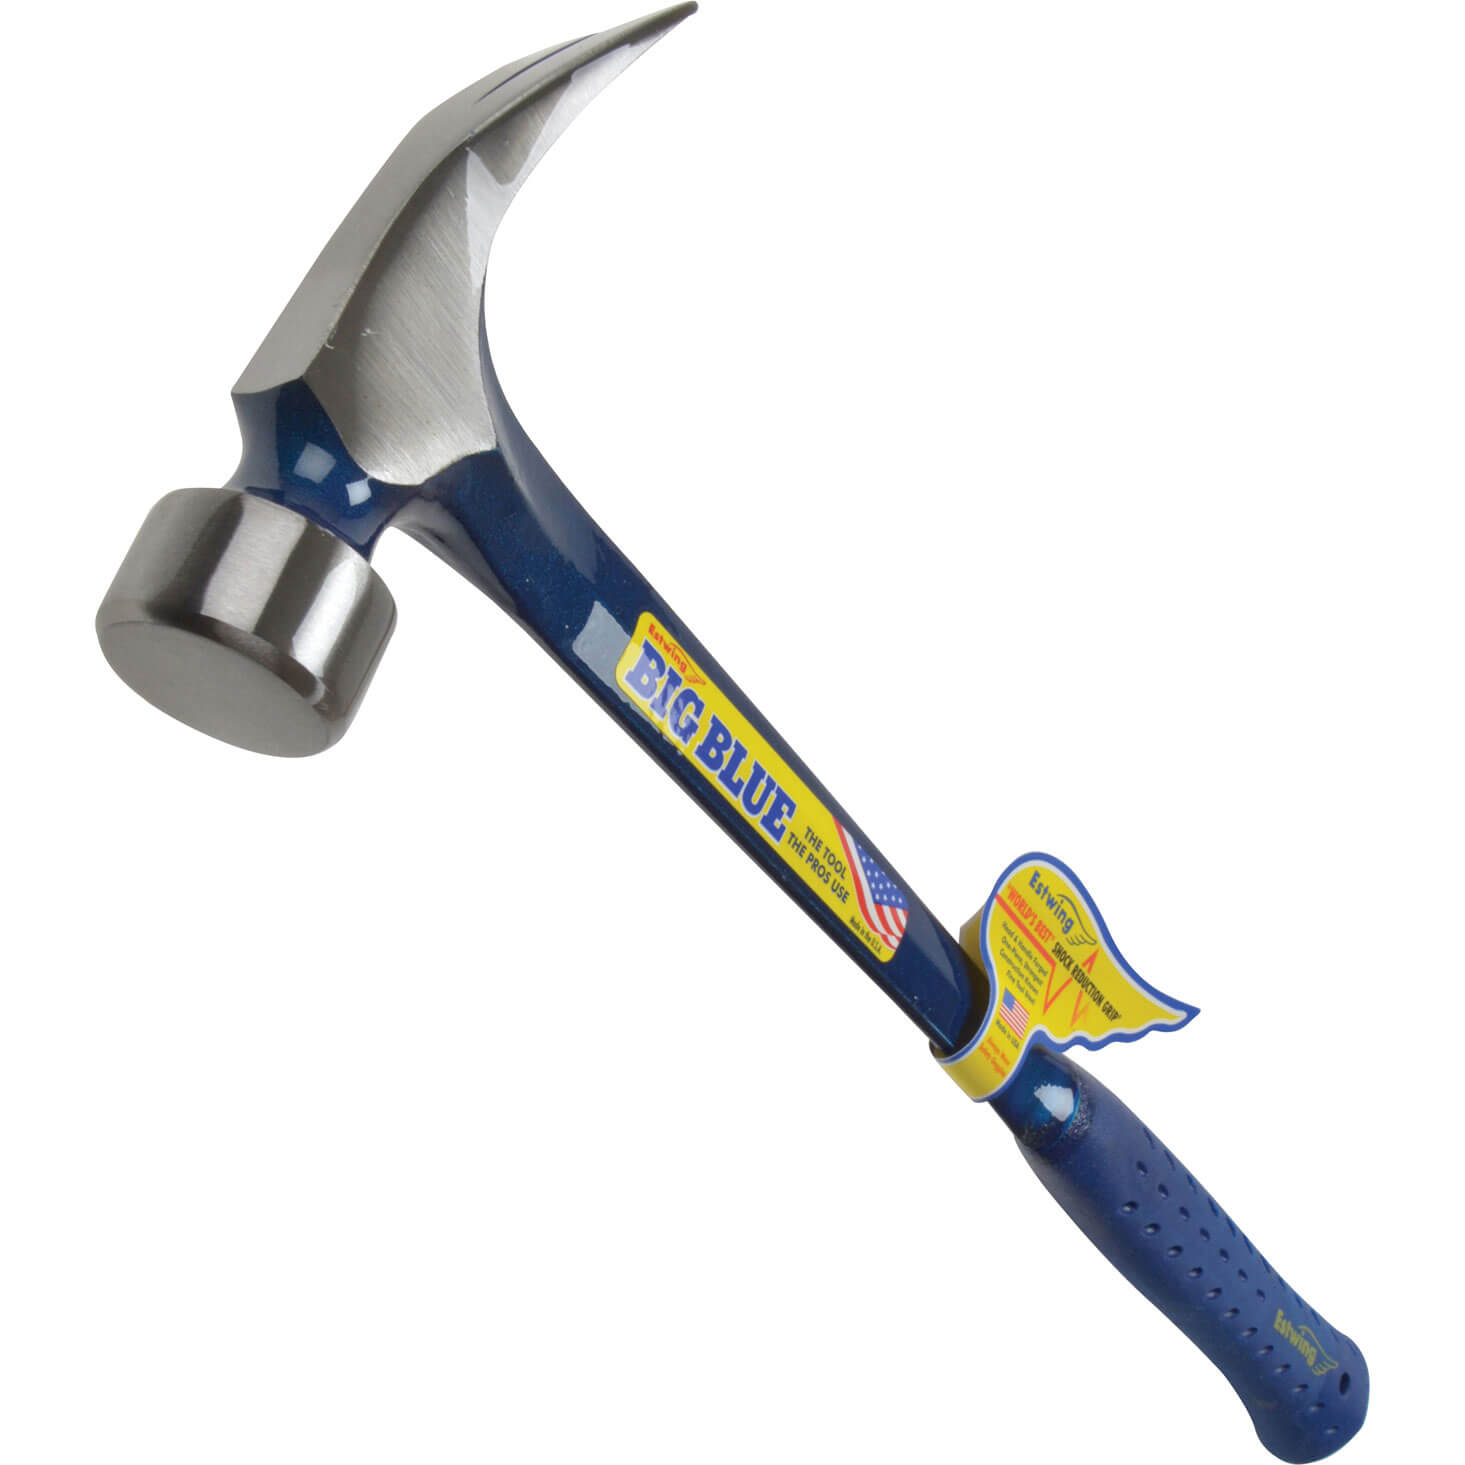 Image of Estwing Straight Claw Framing Hammer 700g